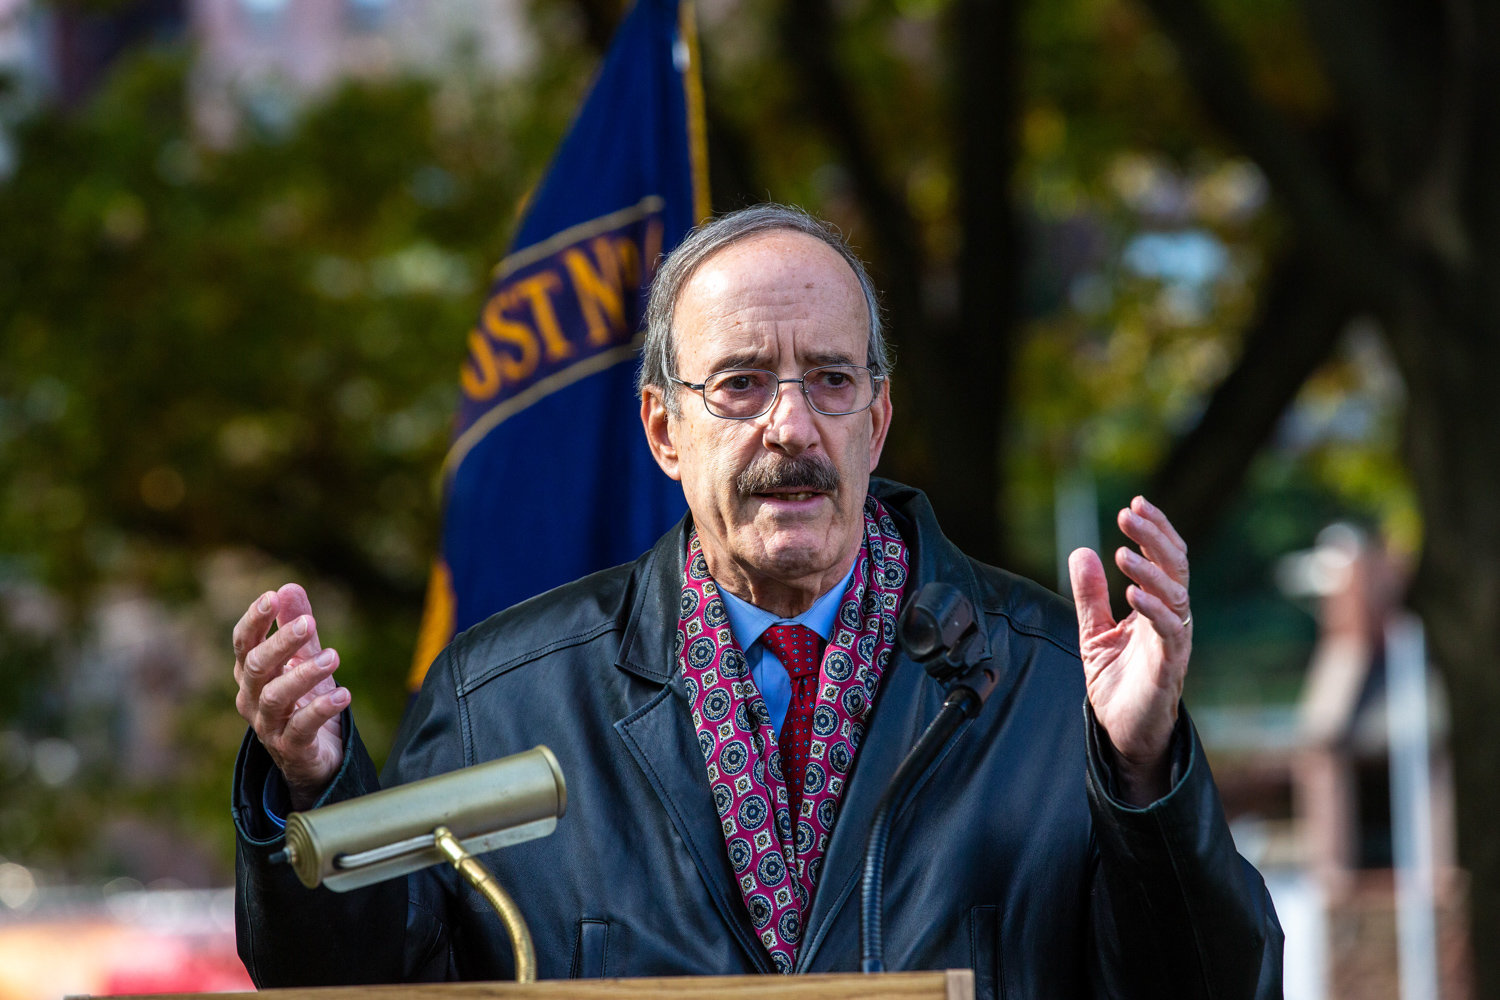 U.S. Rep. Eliot Engel leveraged his international connections as chair of the House Foreign Affairs Committee to jumpstart production at a Malaysian factory to produce a key component for a CPAP mask a Florida medical manufacturer says can help people suffering from COVID-19.